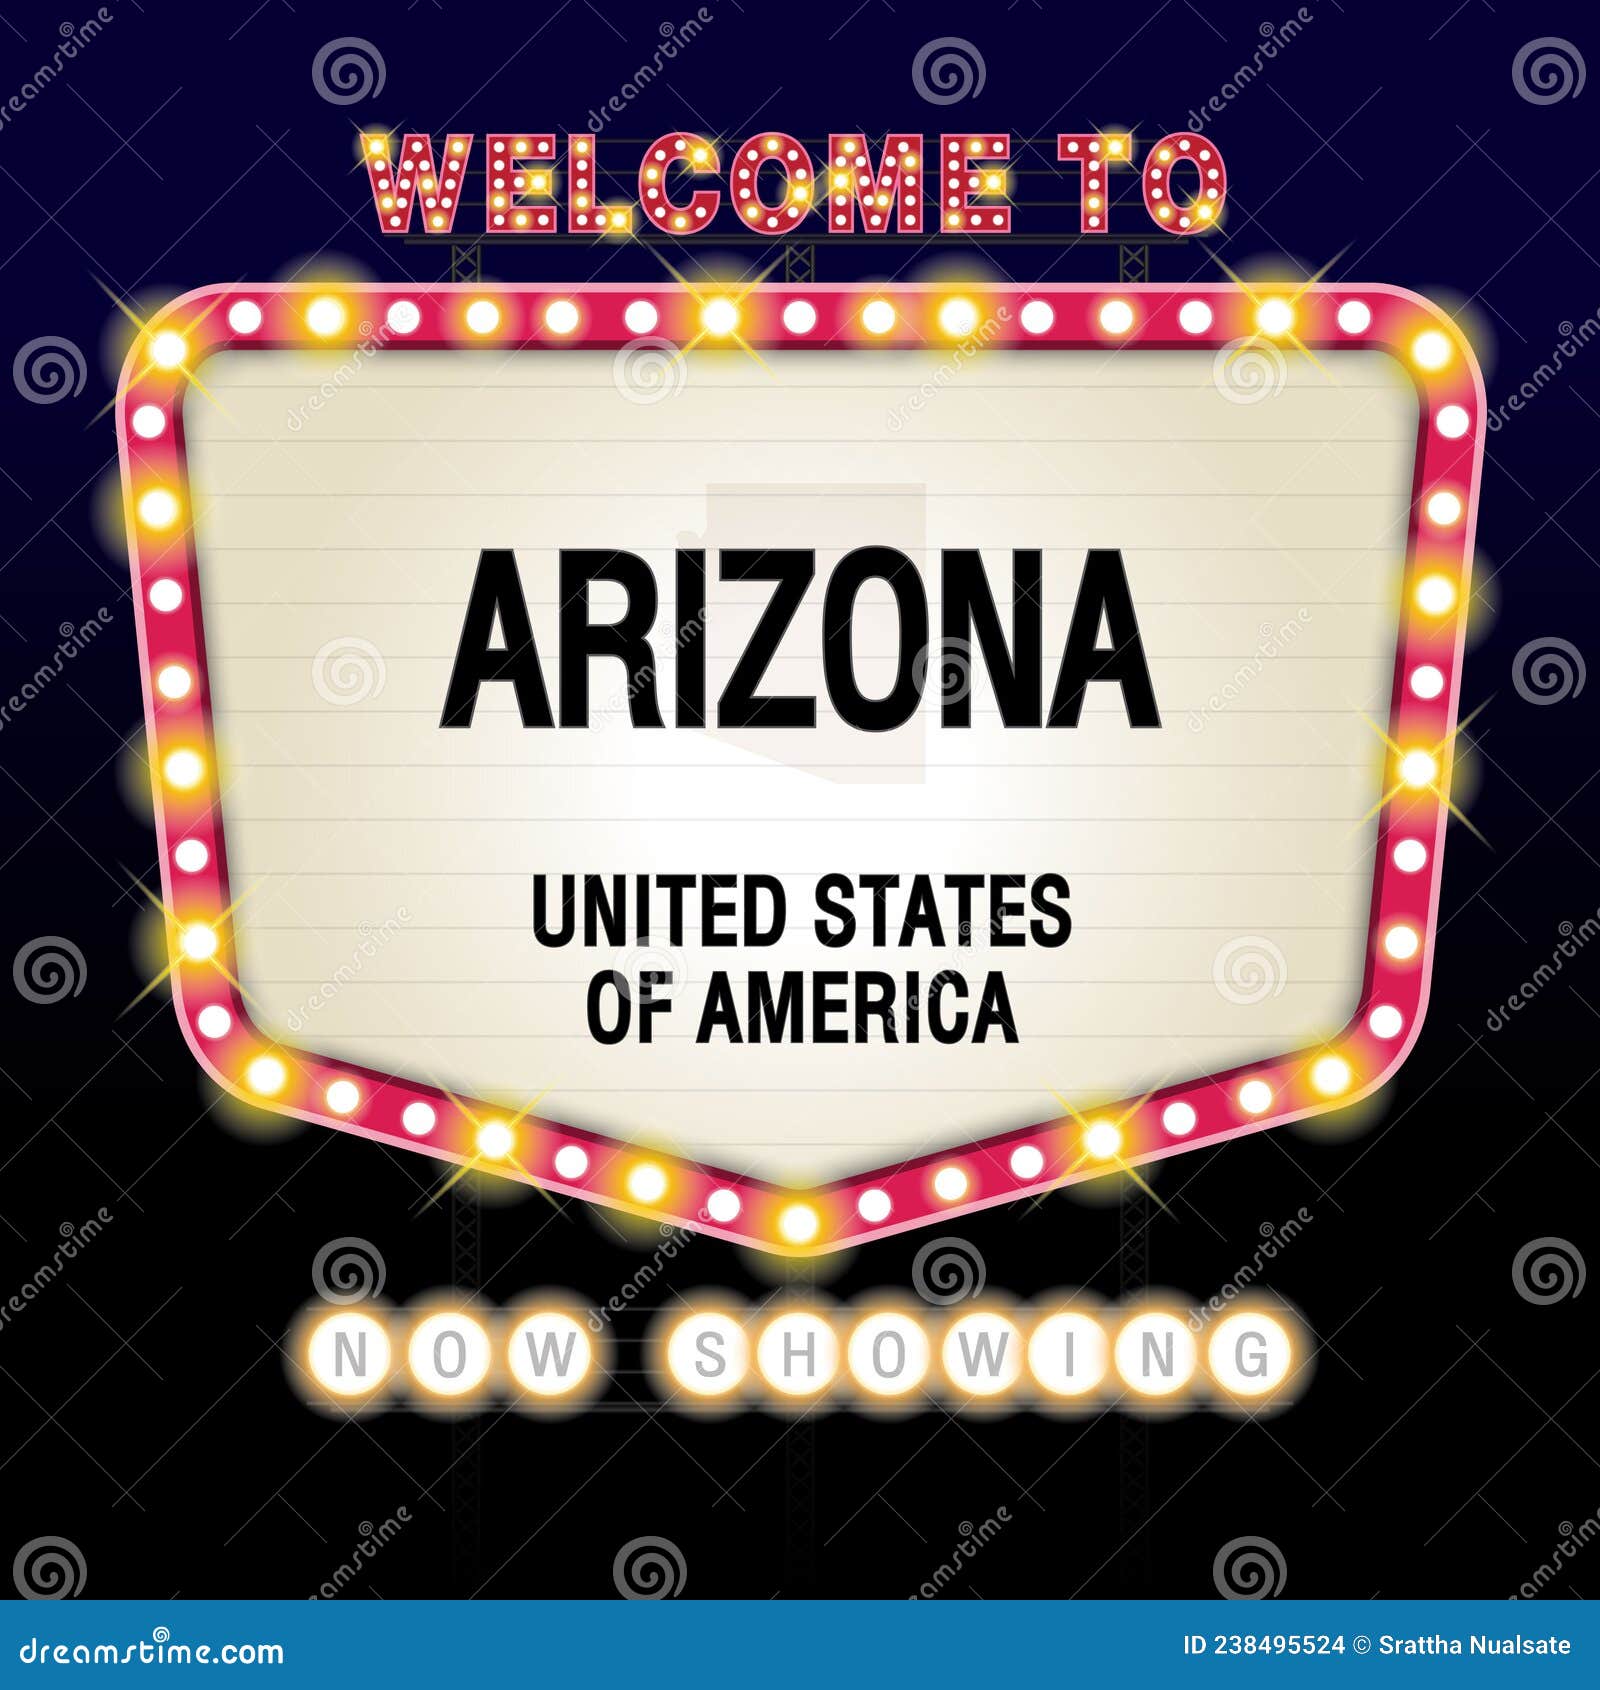 the sign united states of america with message, arizona and map on showtime sign theatre background  art image 